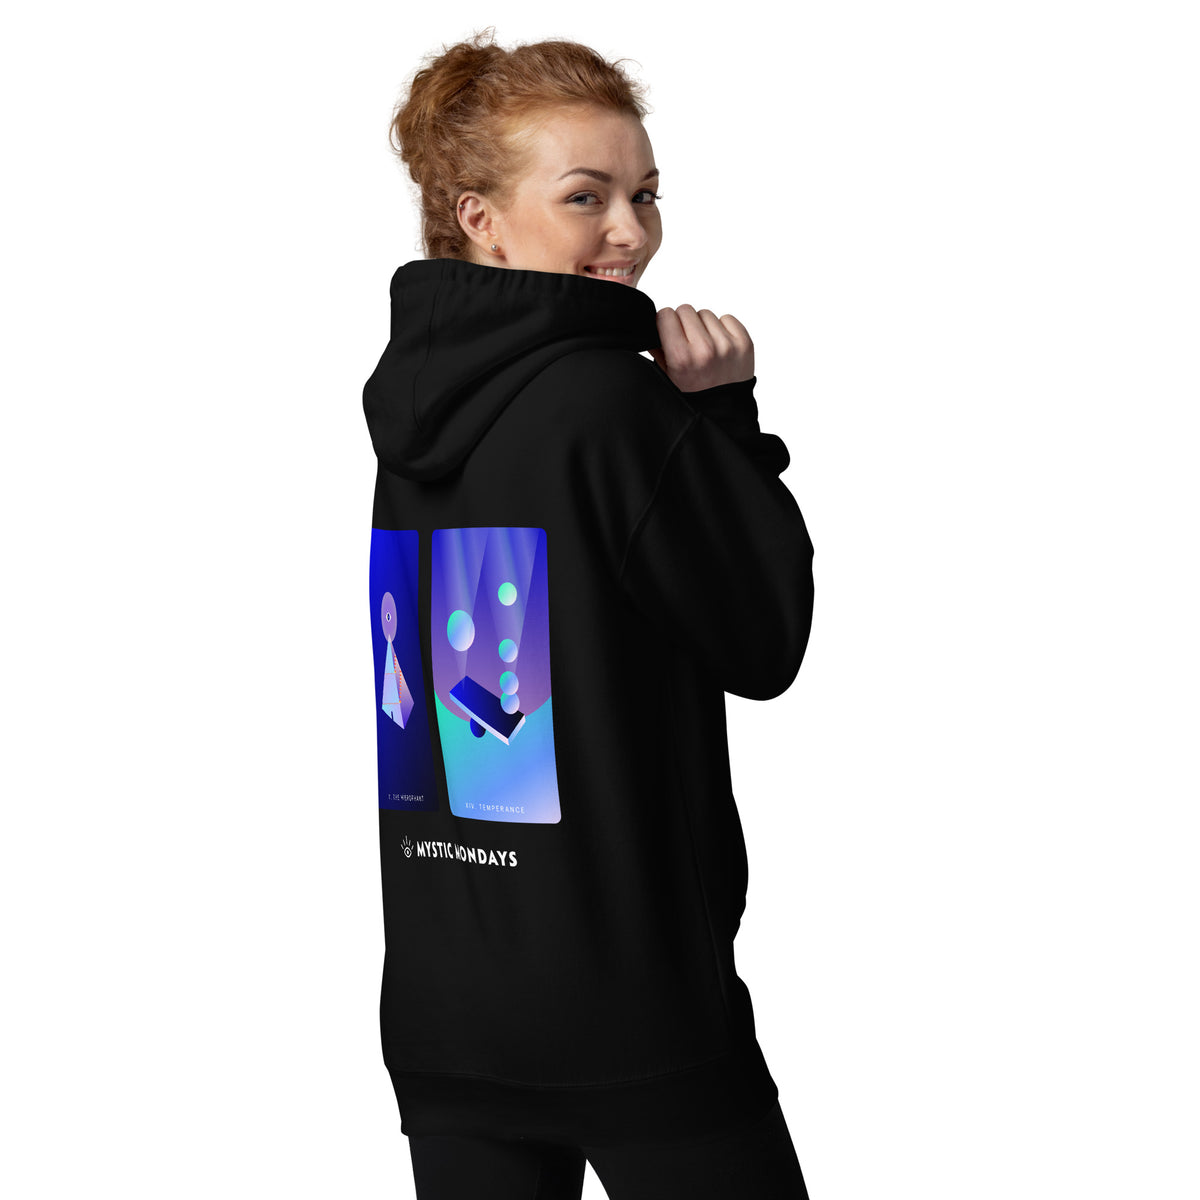 The Hierophant and Temperance Hoodie